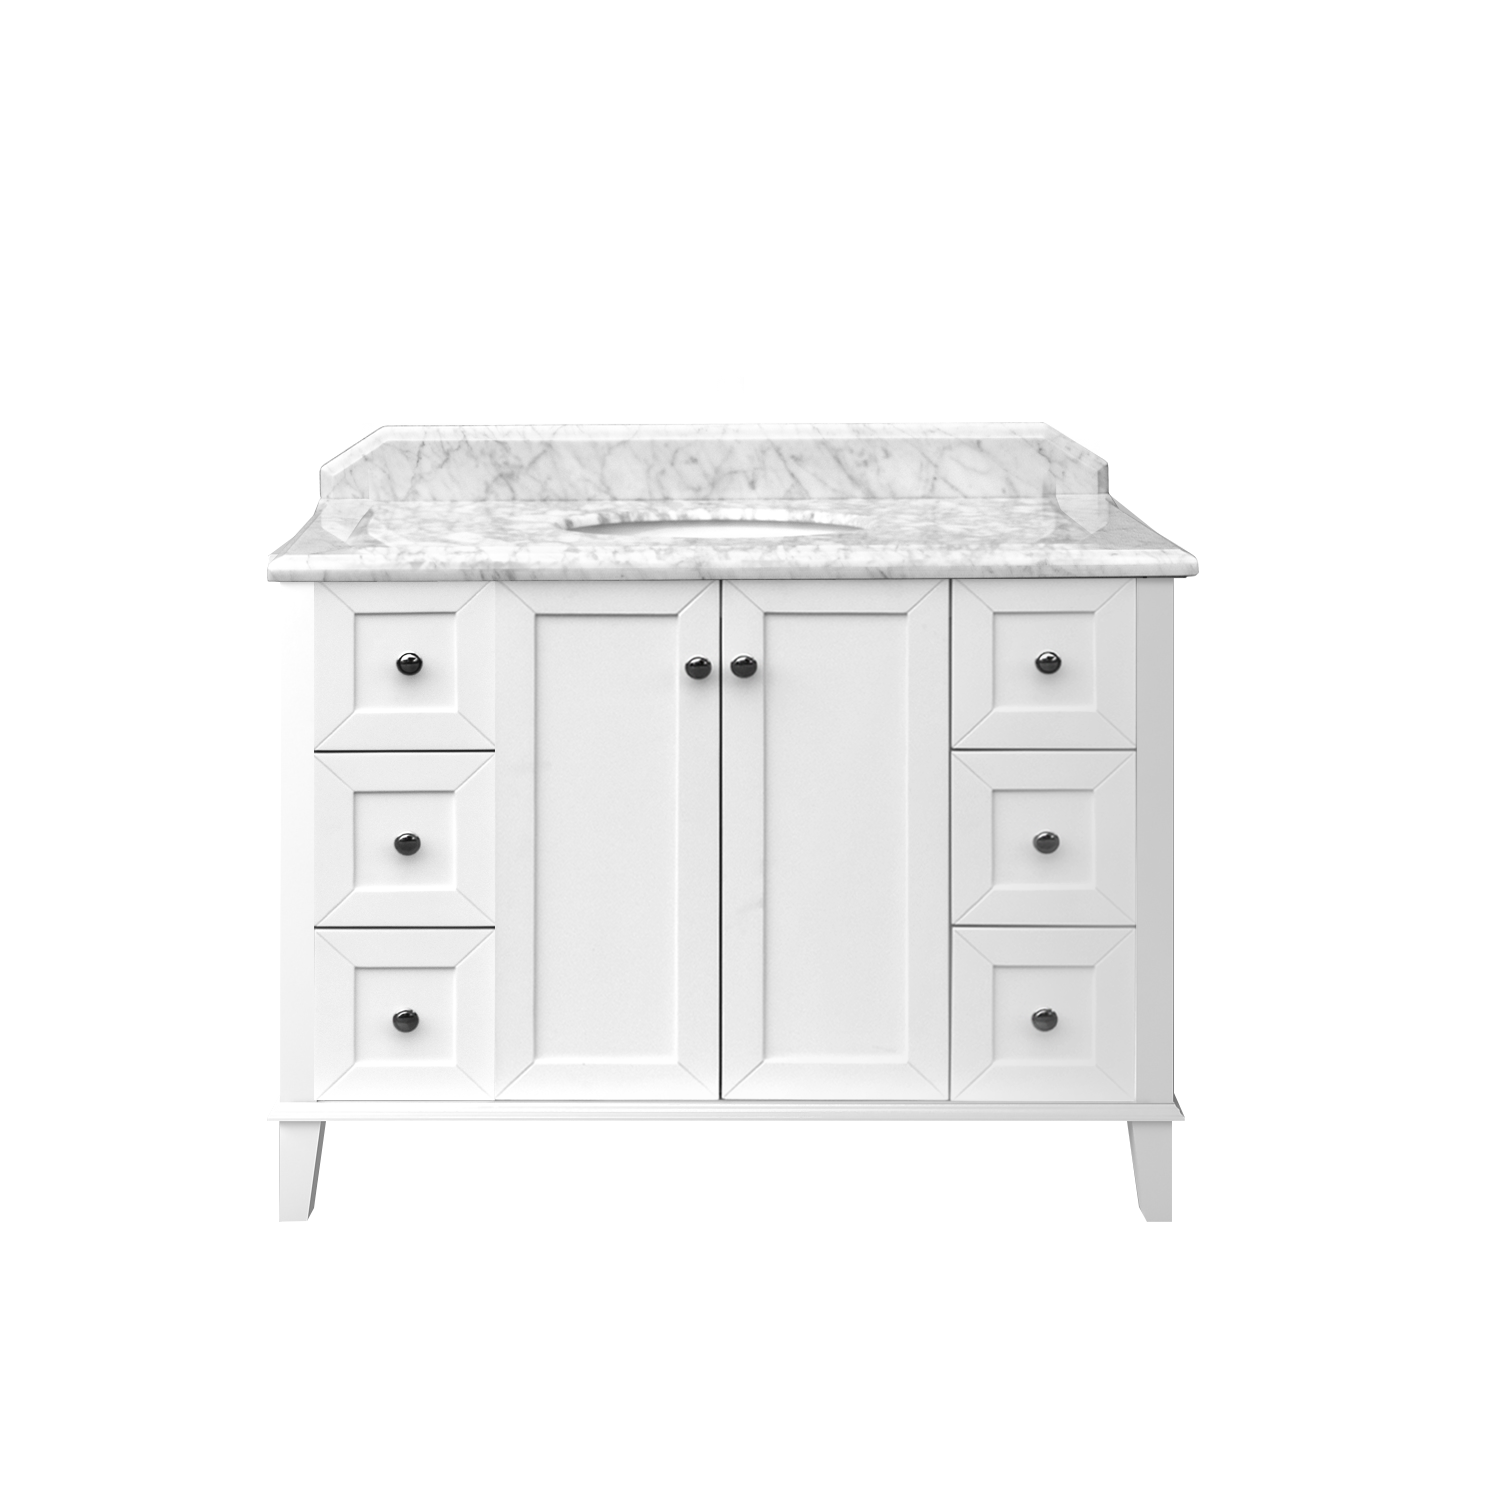 Coventry 120x55 Single Bowl White Vanity with Marble Top & Under Counter Basin - 1TH